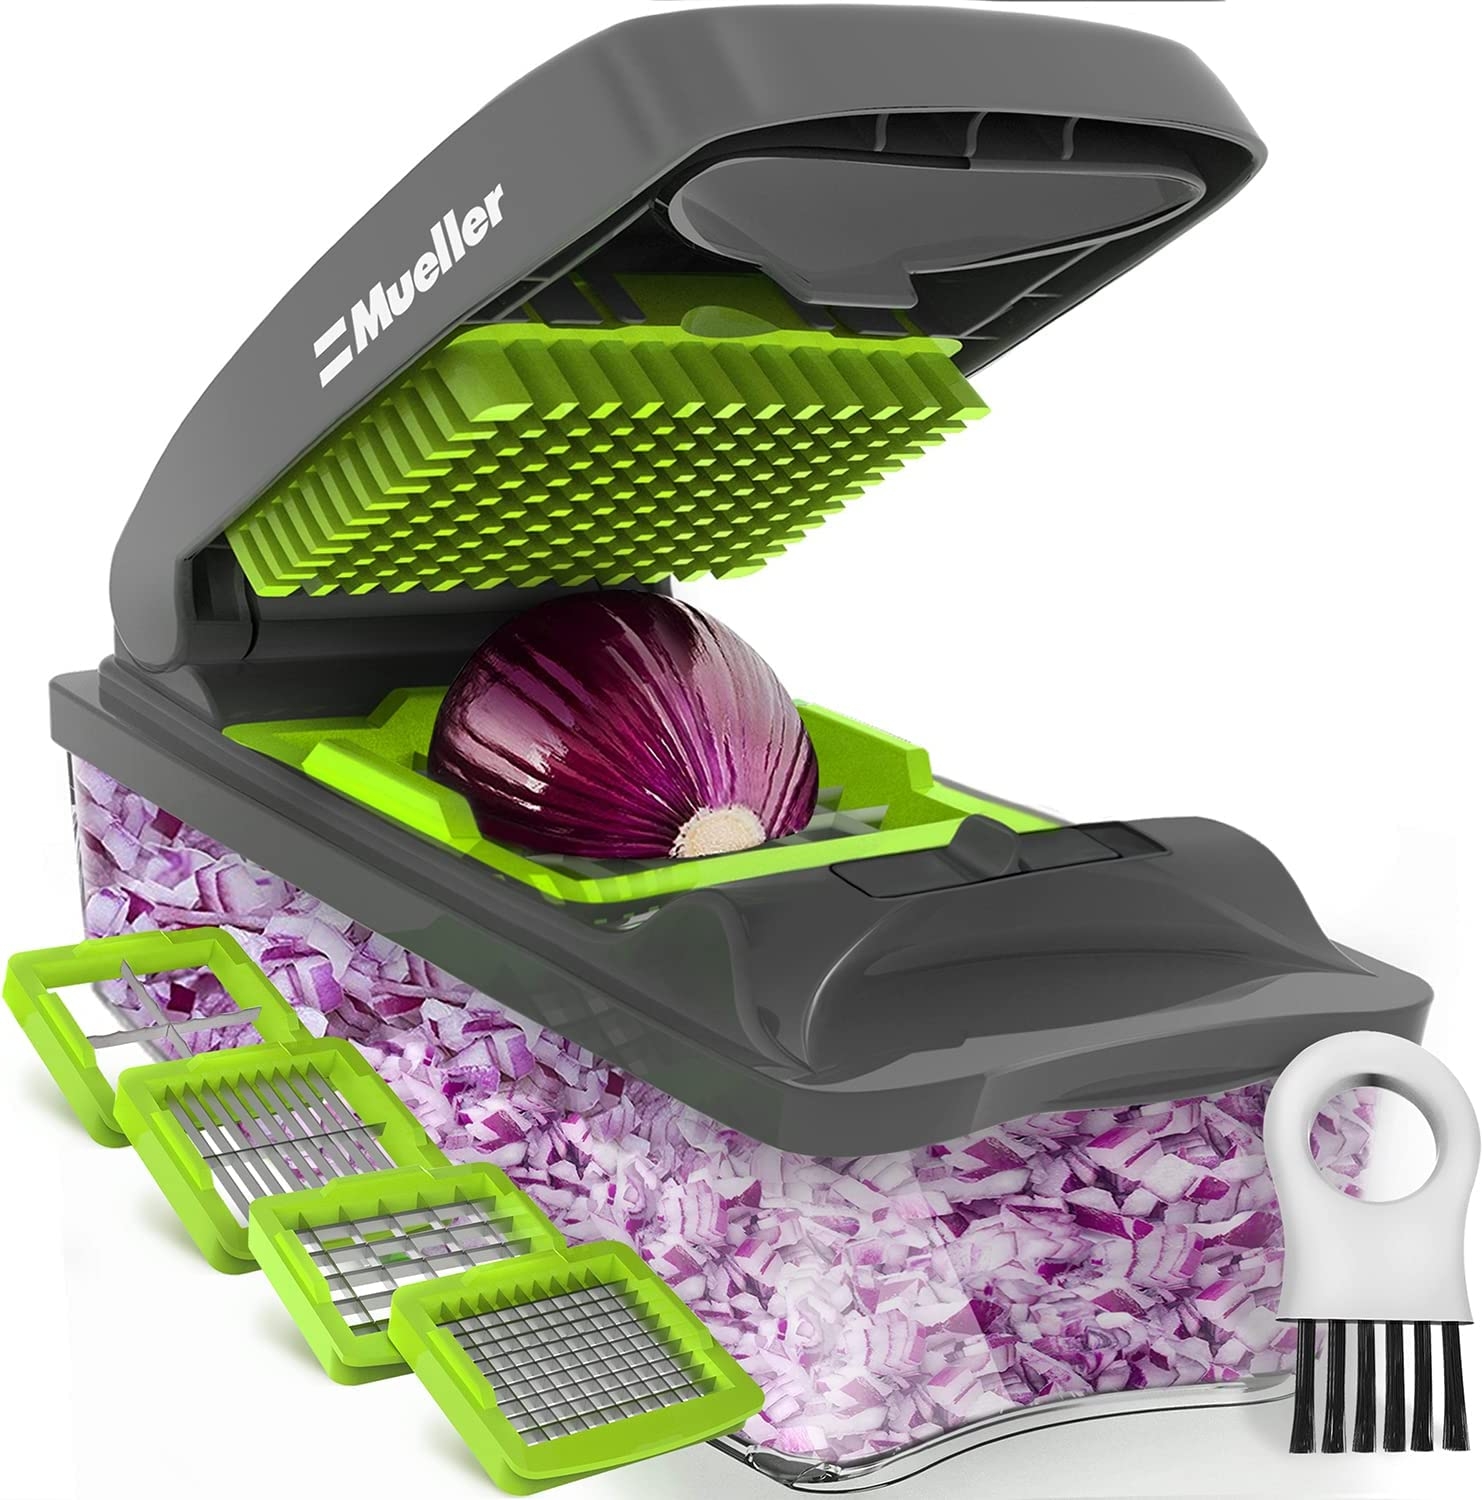 Mueller Vegetable Chopper – Heavy Duty Vegetable Slicer – Onion Chopper with Container – Food Chopper Slicer Dicer Cutter – 4